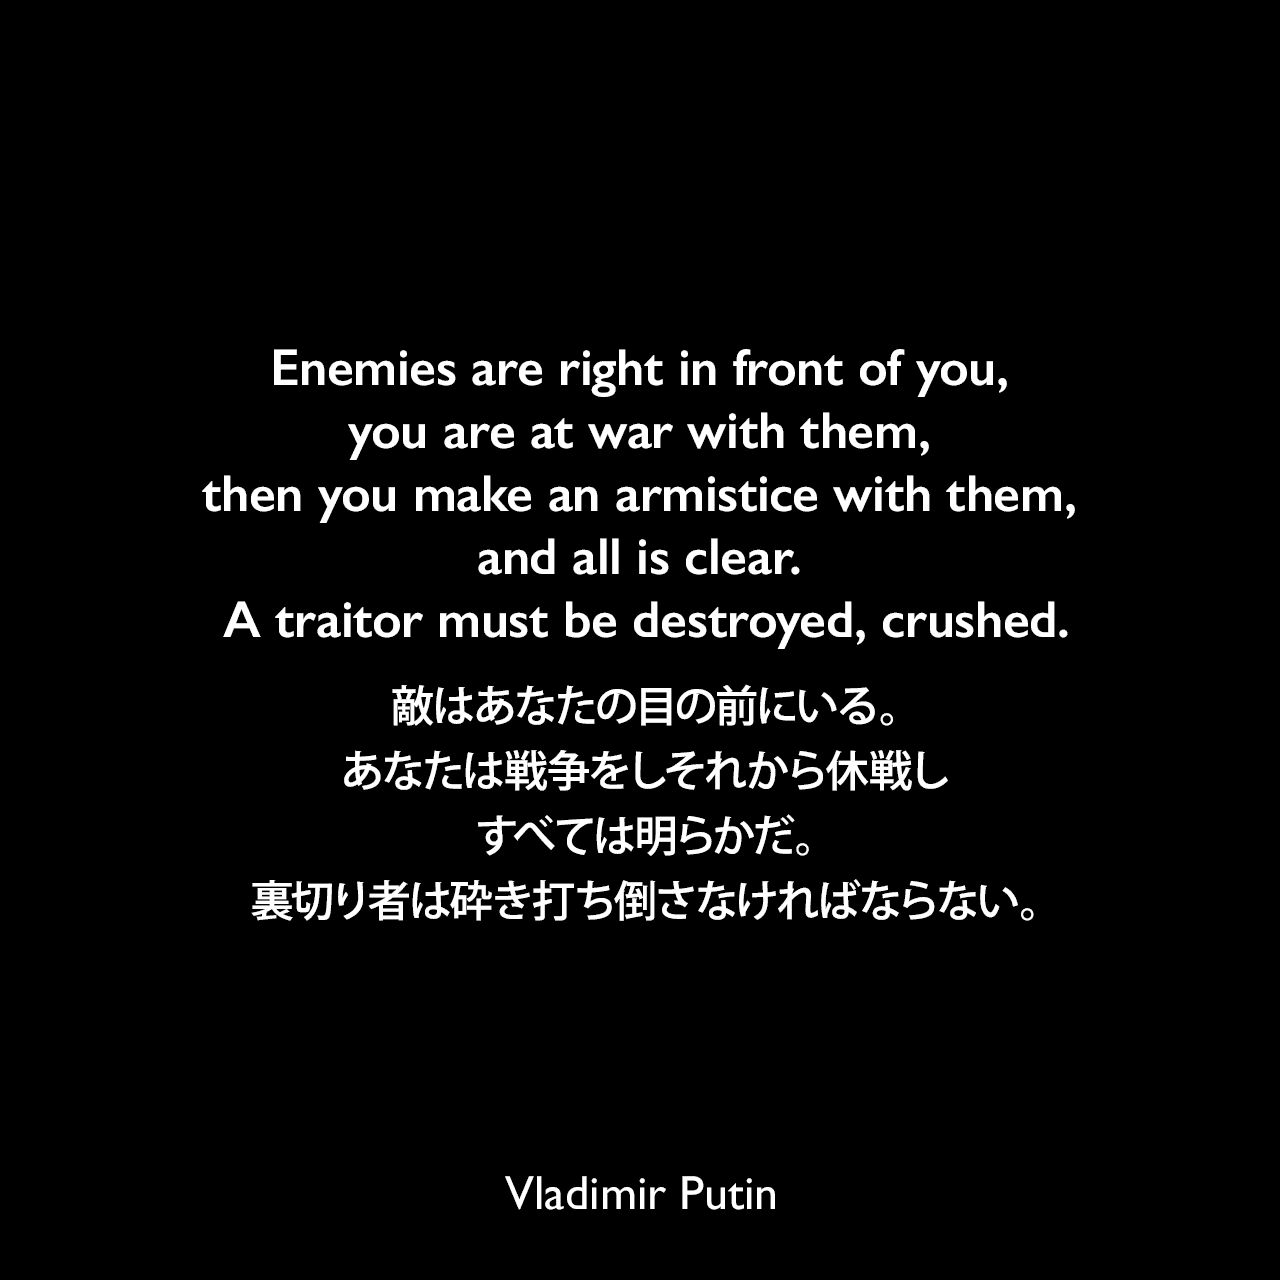 Enemies are right in front of you, you are at war with them, then you make an armistice with them, and all is clear. A traitor must be destroyed, crushed.敵はあなたの目の前にいる。あなたは戦争をしそれから休戦し、すべては明らかだ。裏切り者は砕き打ち倒さなければならない。- 2001年、ジャーナリストのアレクセイ・ヴェネディクトフに語りかけた言葉Vladimir Putin